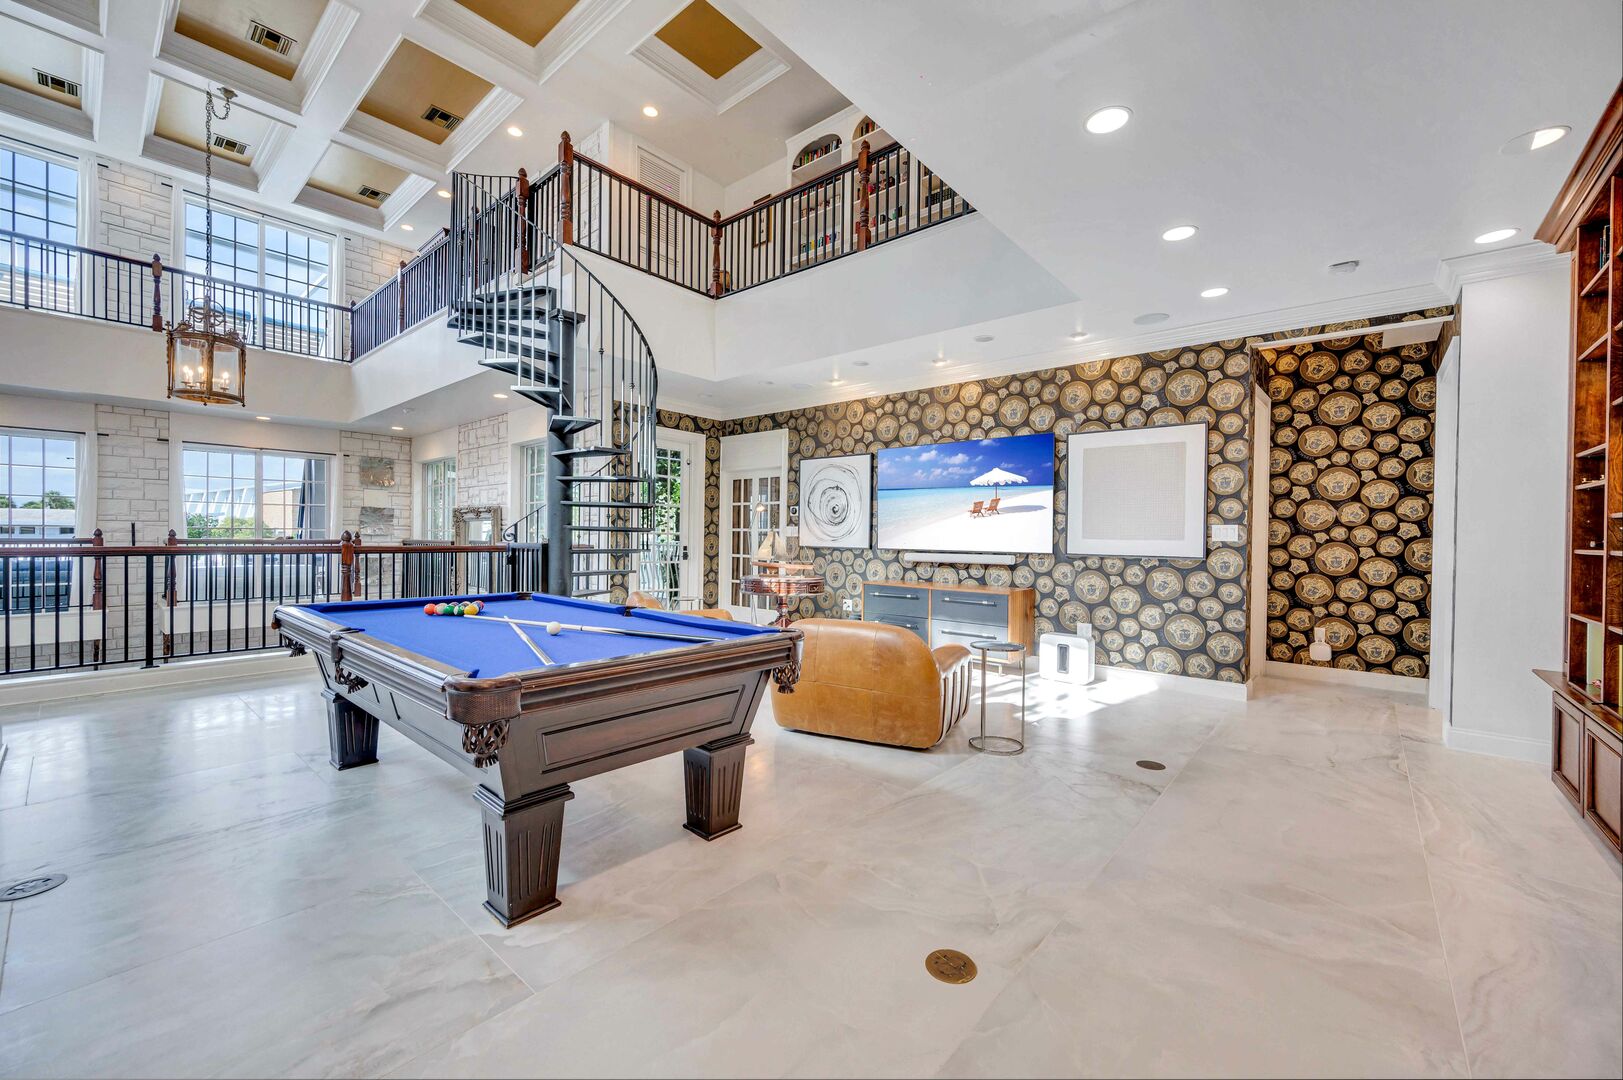 The second floor features a pool table, Smart TV, Sonos system and piano that can connect to it.